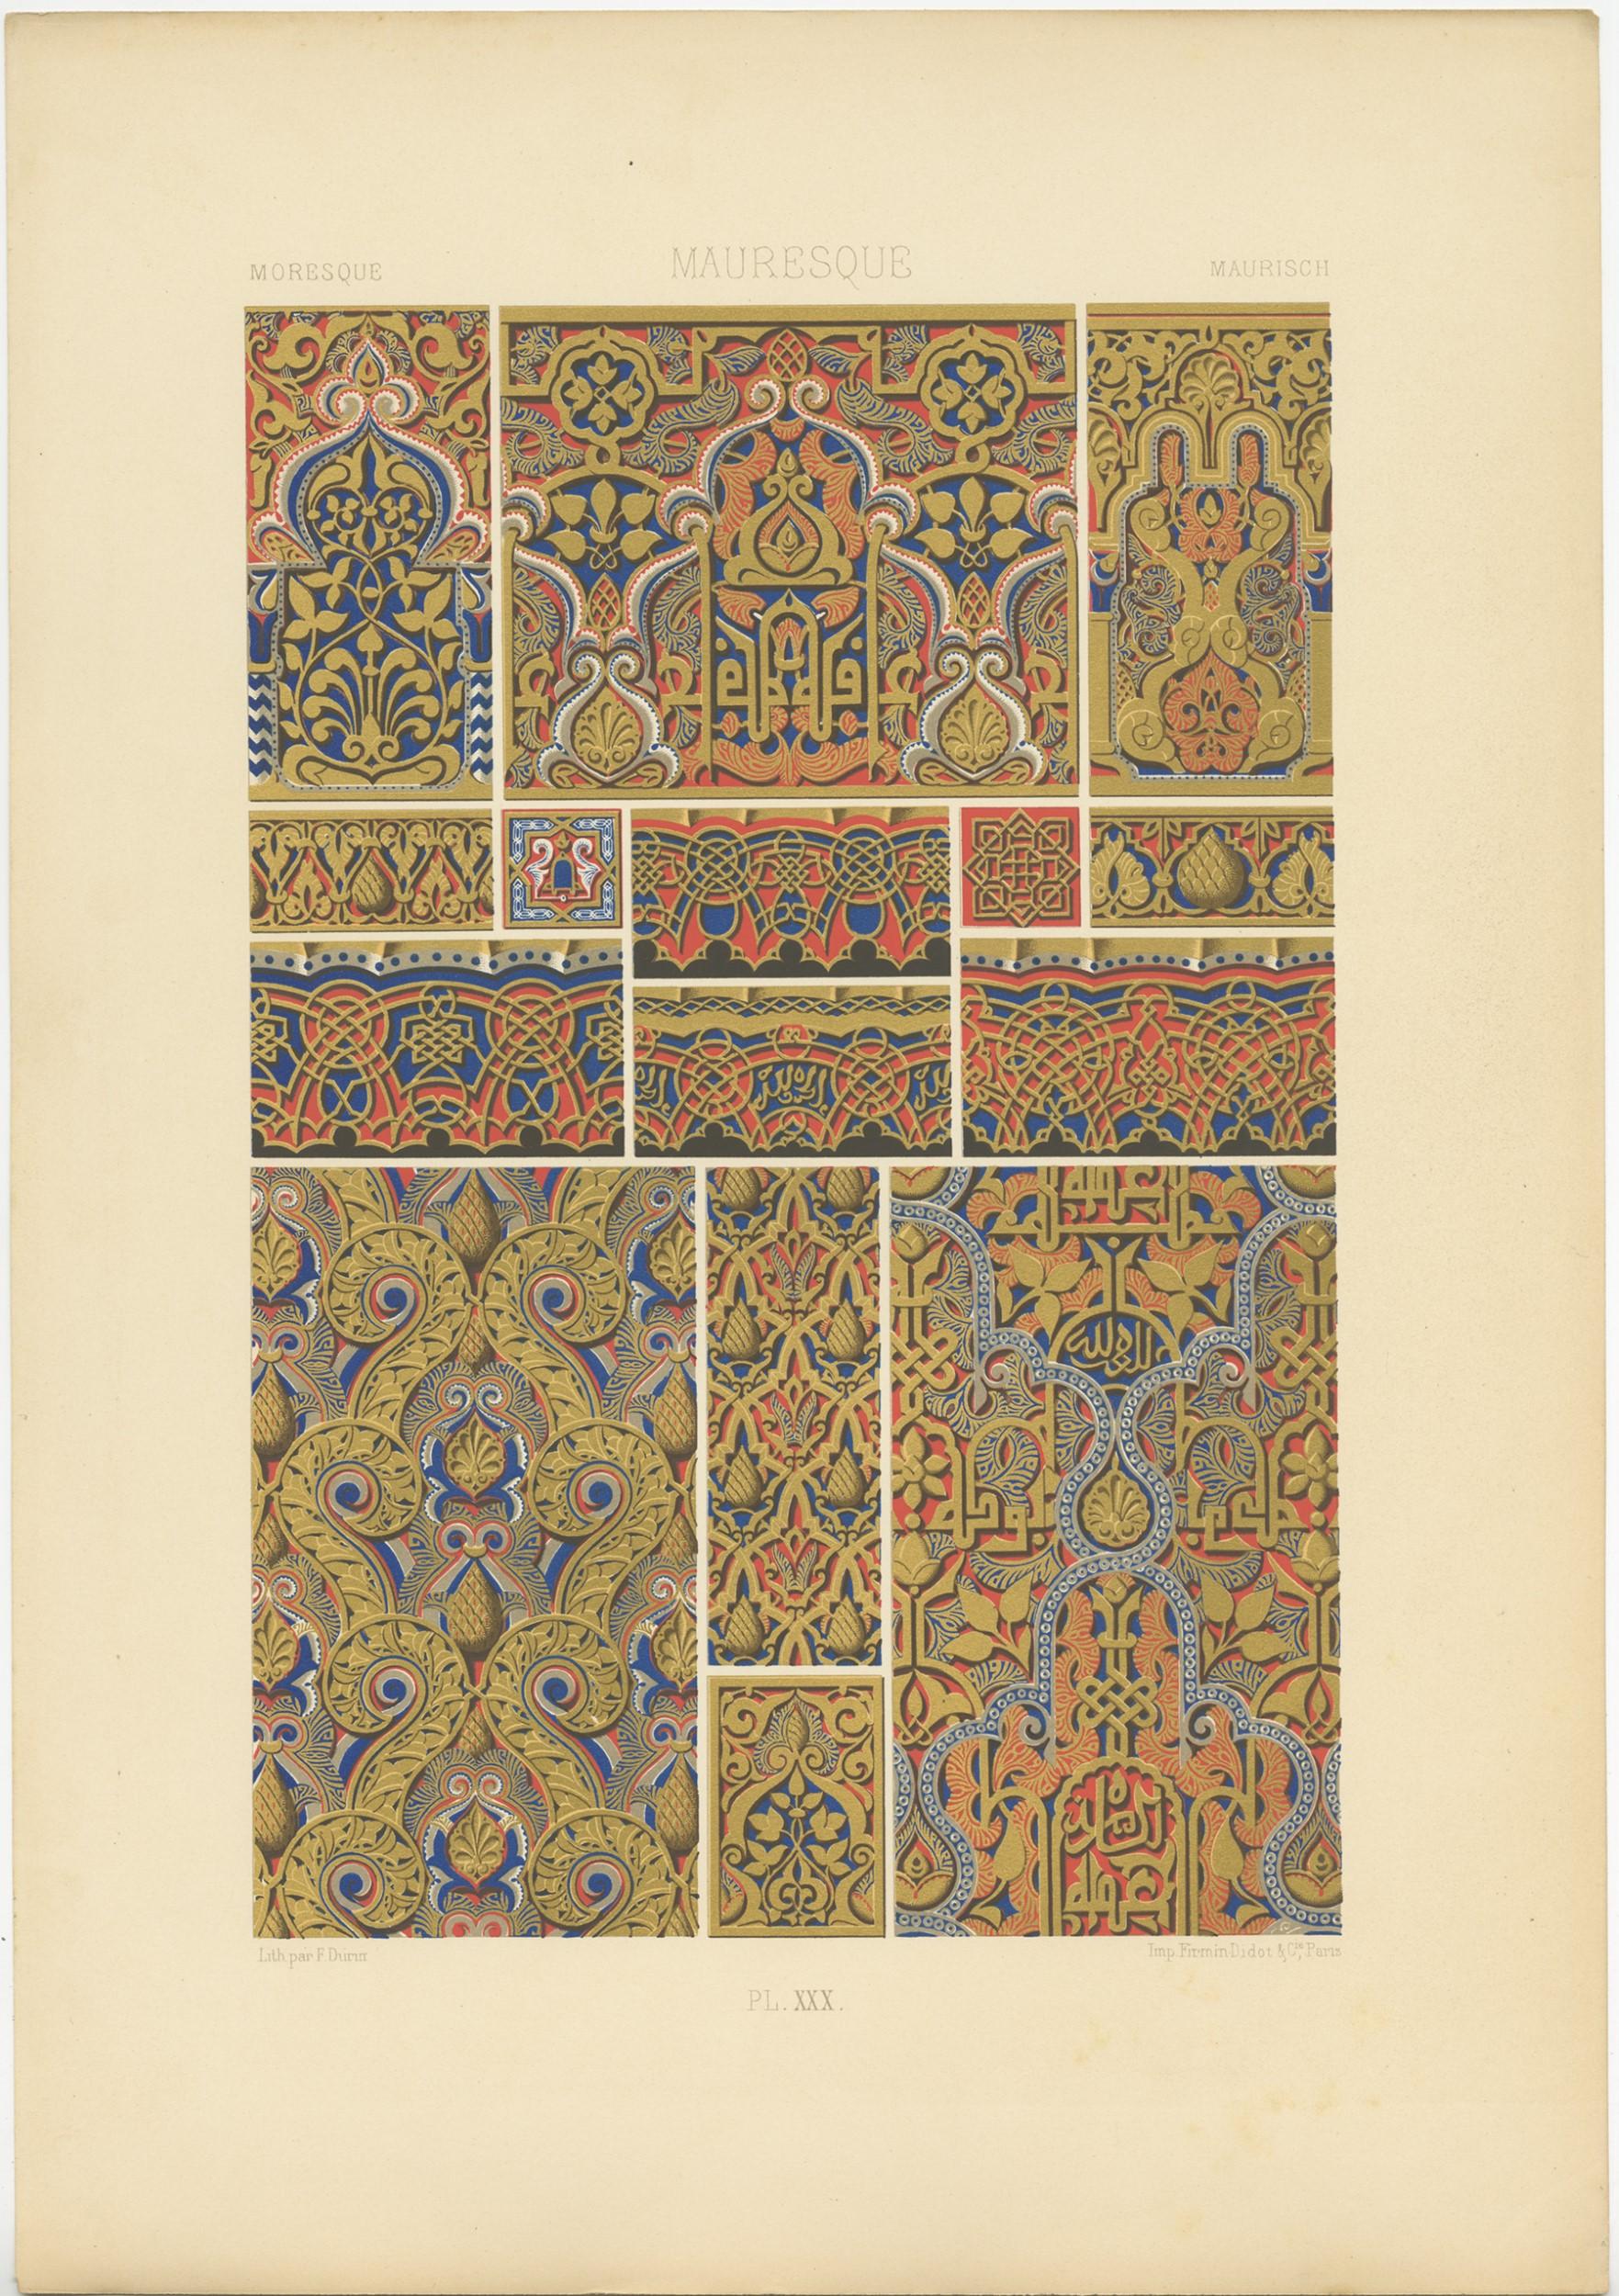 Antique print titled 'Moresque - Mauresque - Maurisch'. Chromolithograph of Moresque ornaments and decorative arts. This print originates from 'l'Ornement Polychrome' by Auguste Racinet. Published circa 1890.